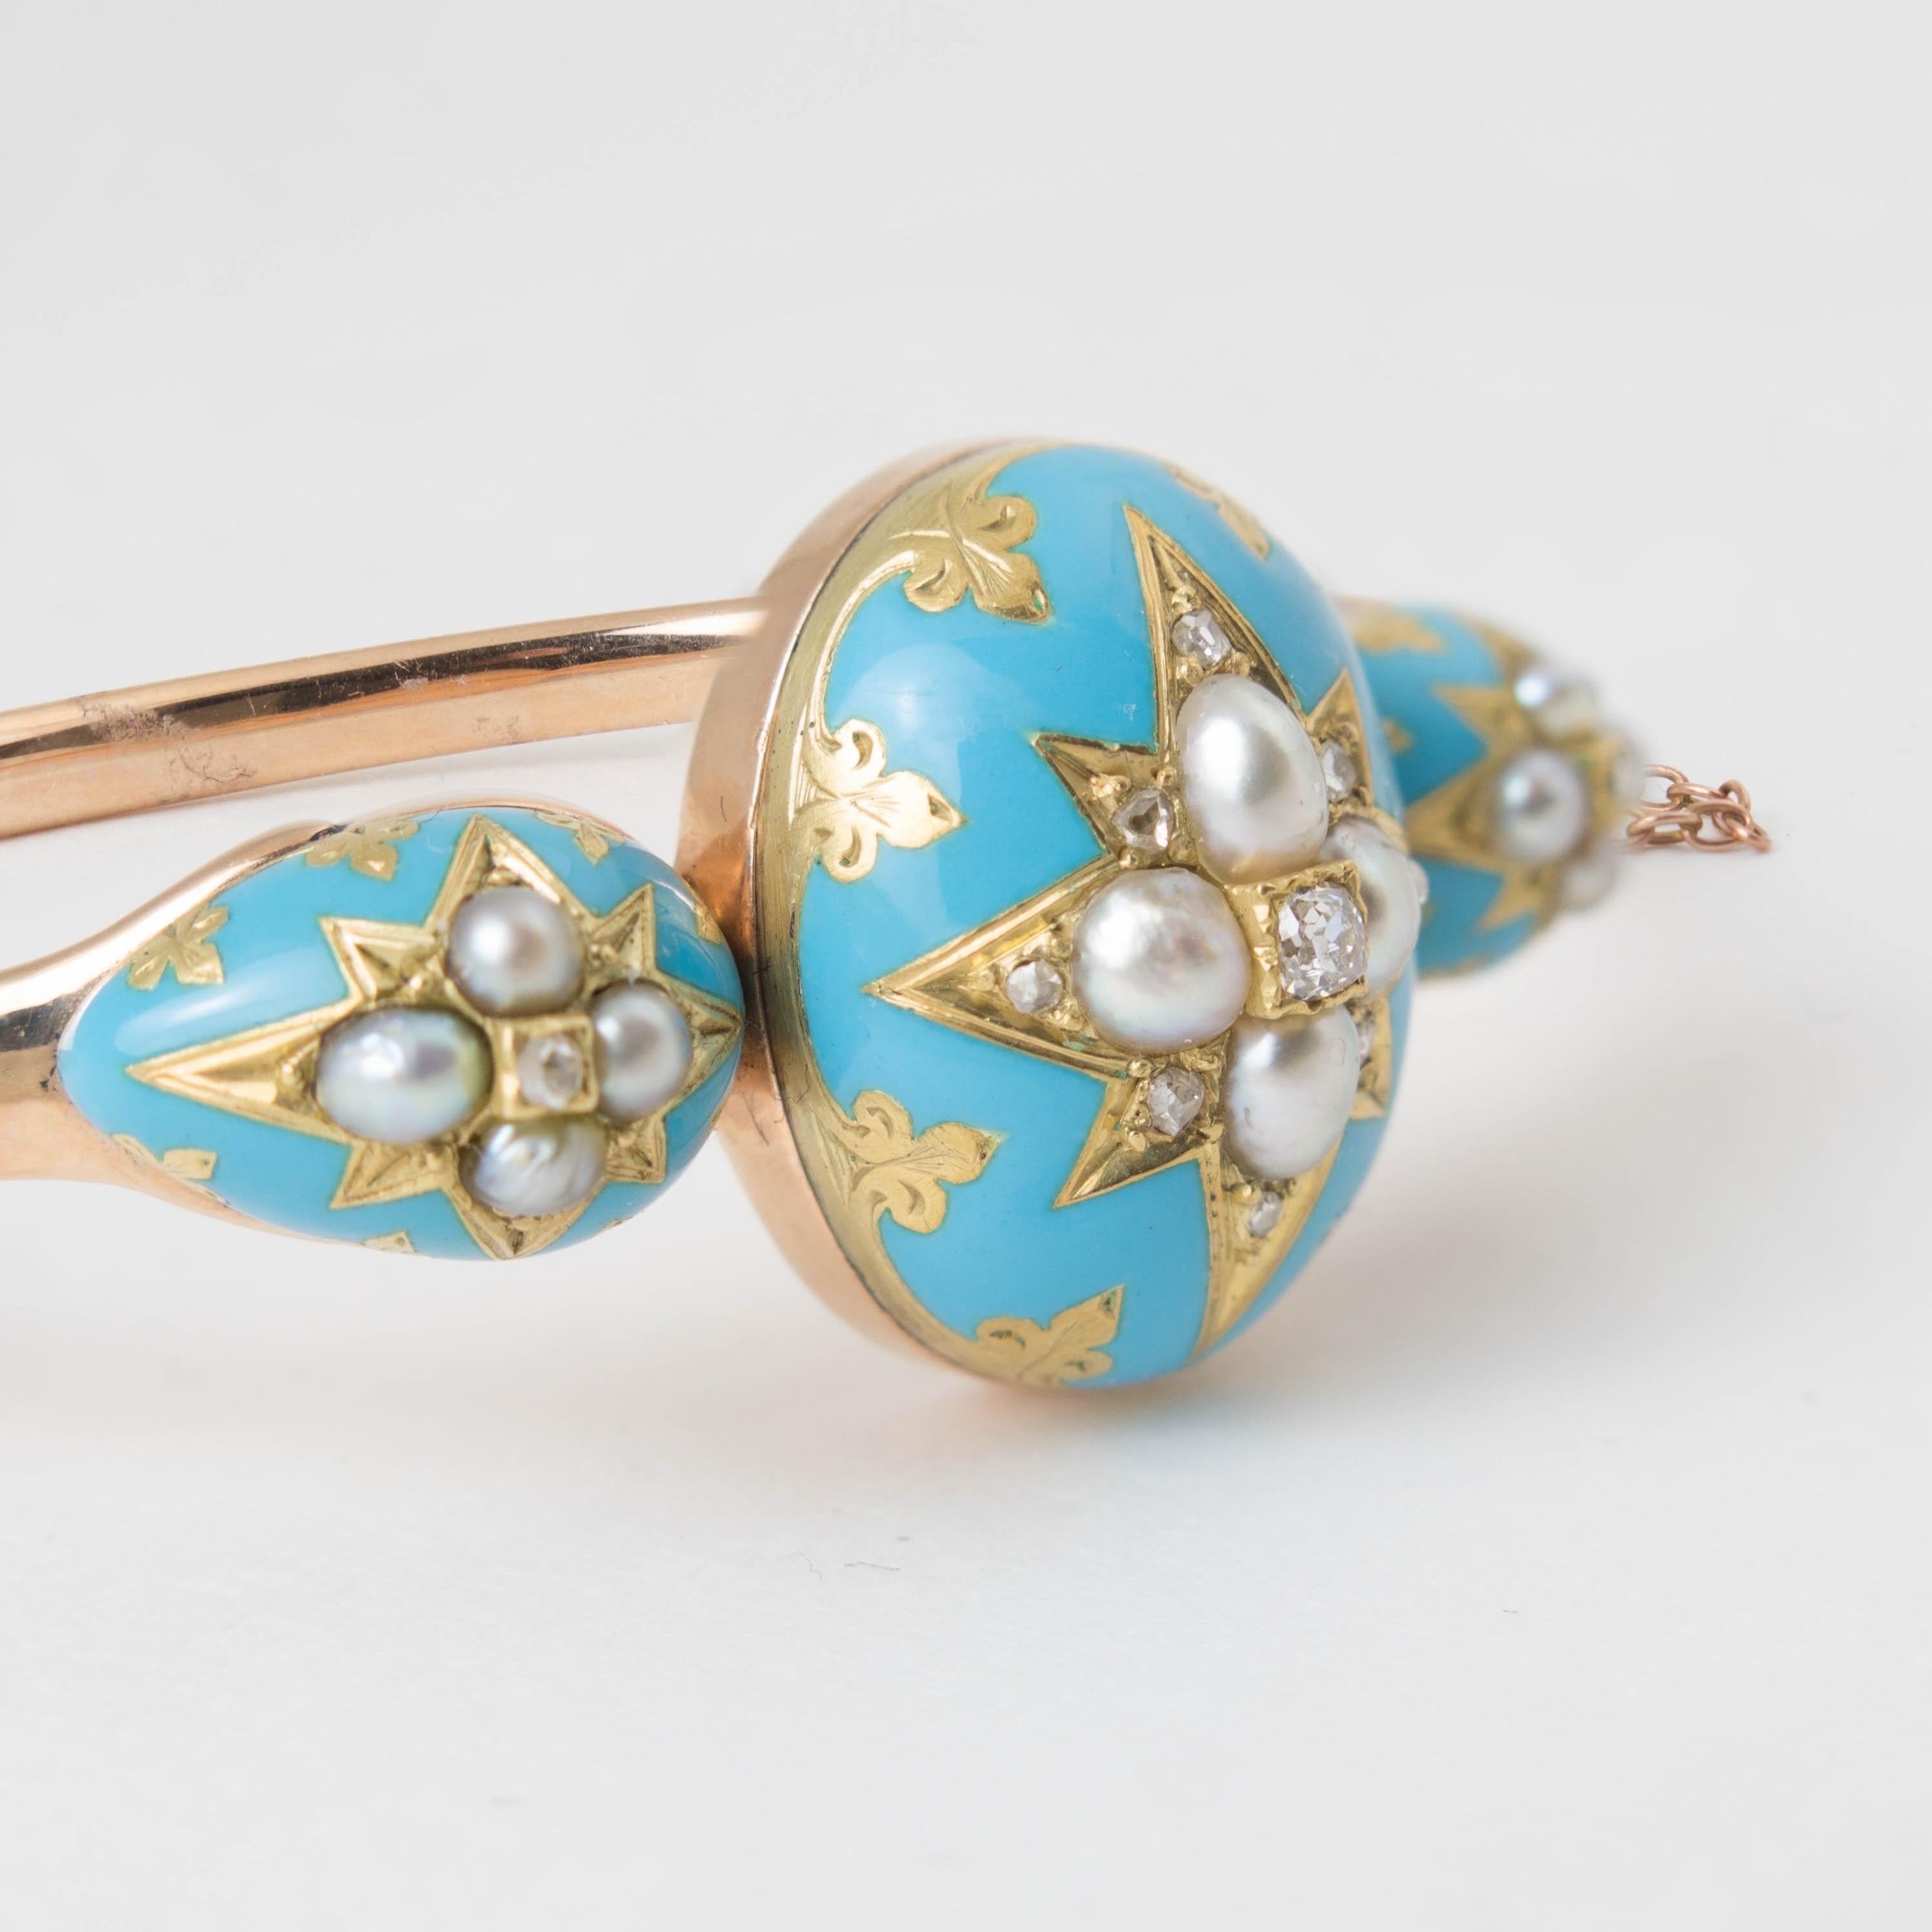 A beautiful and elegant Victorian 15k rose and yellow gold hinged bangle bracelet, late 19th century, England. 
The 15k rose gold bracelet features three large oval domes of enchanting turquoise blue enamel mounted in beautifully worked 15k yellow